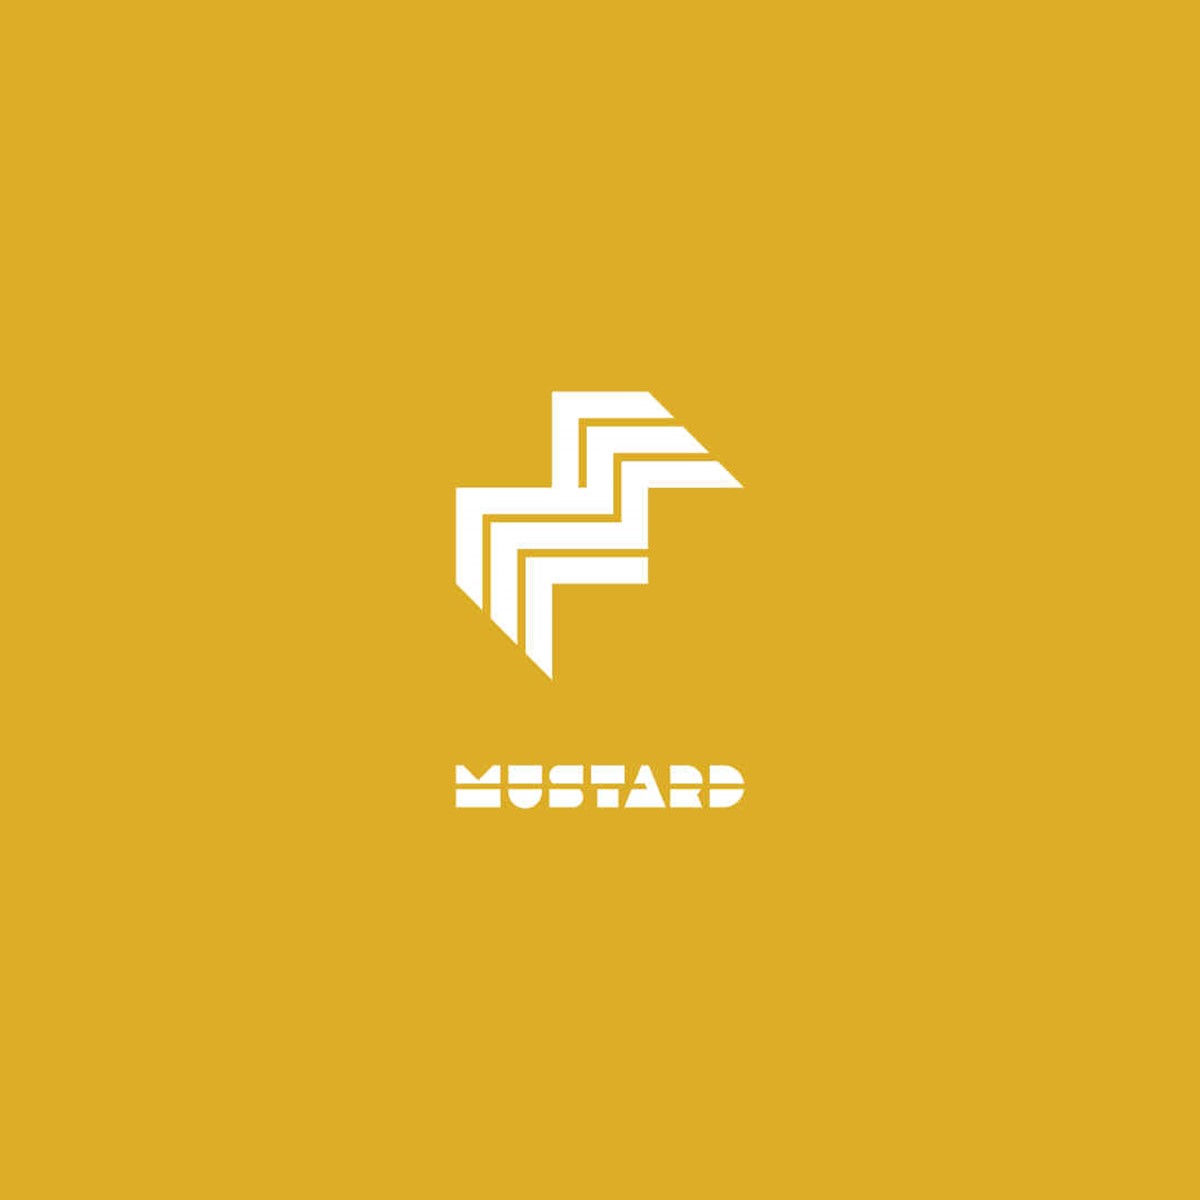 Mustard Coworking stacked logo lock-up – brand identity design by Superfried. Manchester.